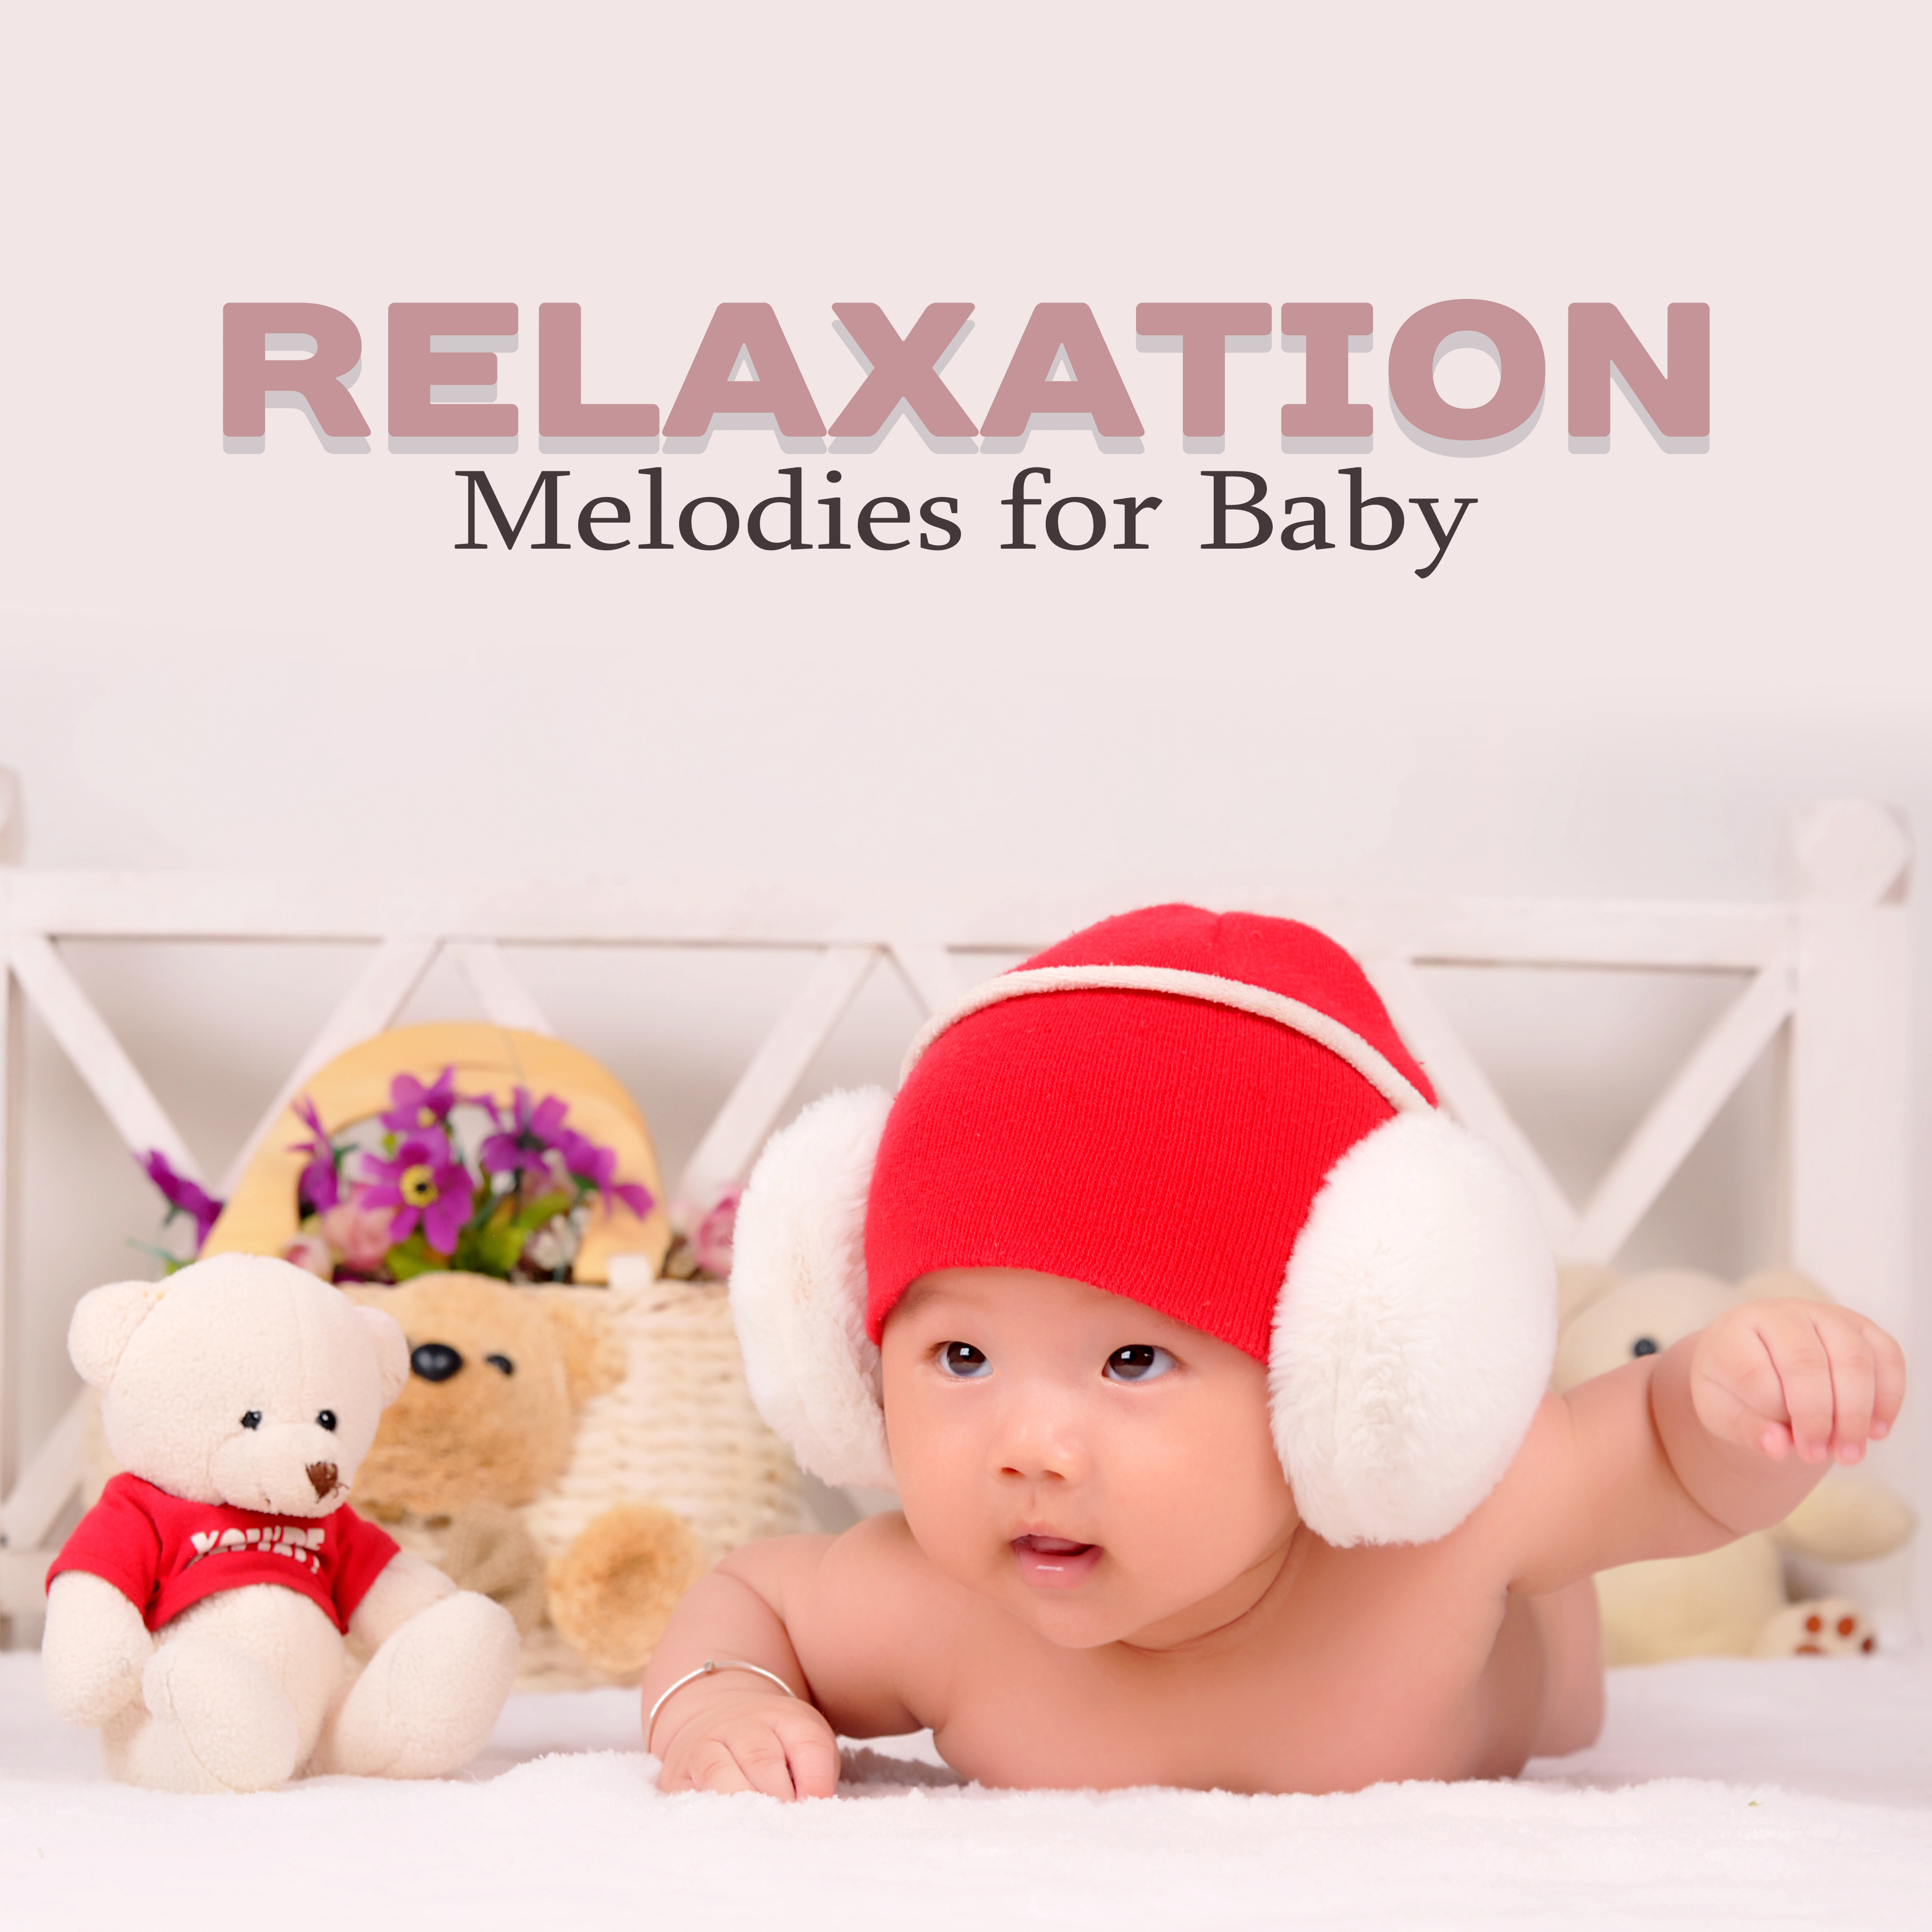 Relaxation Melodies for Baby  Healing Lullabies for Sleep, Peaceful Songs, Bedtime, Baby Music, Schubert, Tchaikovsky